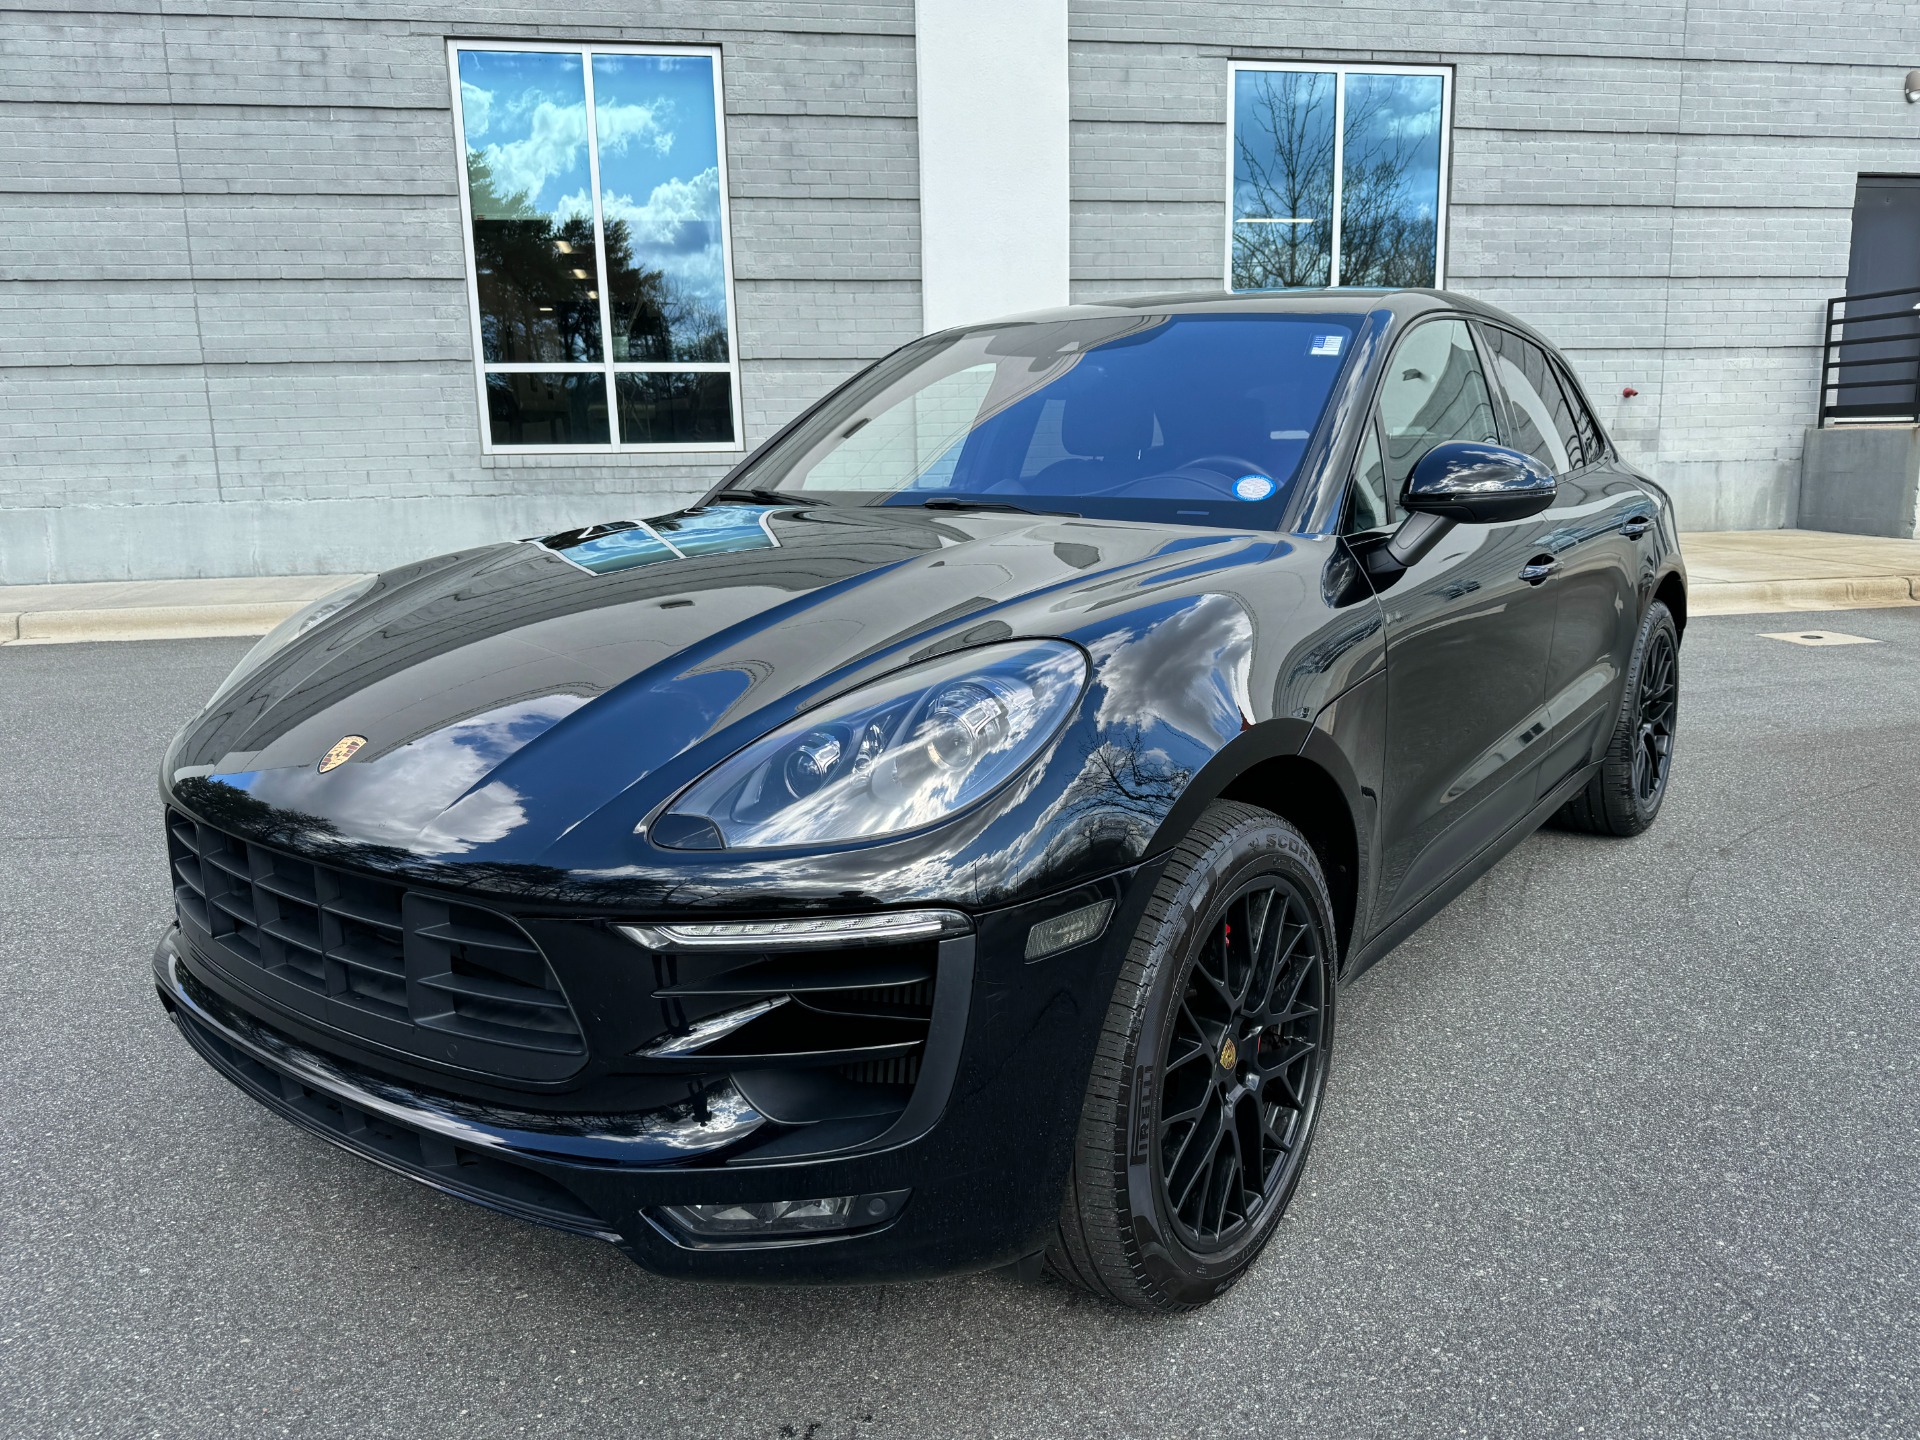 Used 2018 Porsche Macan GTS / 20IN WHEELS / PREMIUM PLUS / BOSE / SPORT SEATS for sale $53,995 at Formula Imports in Charlotte NC 28227 3